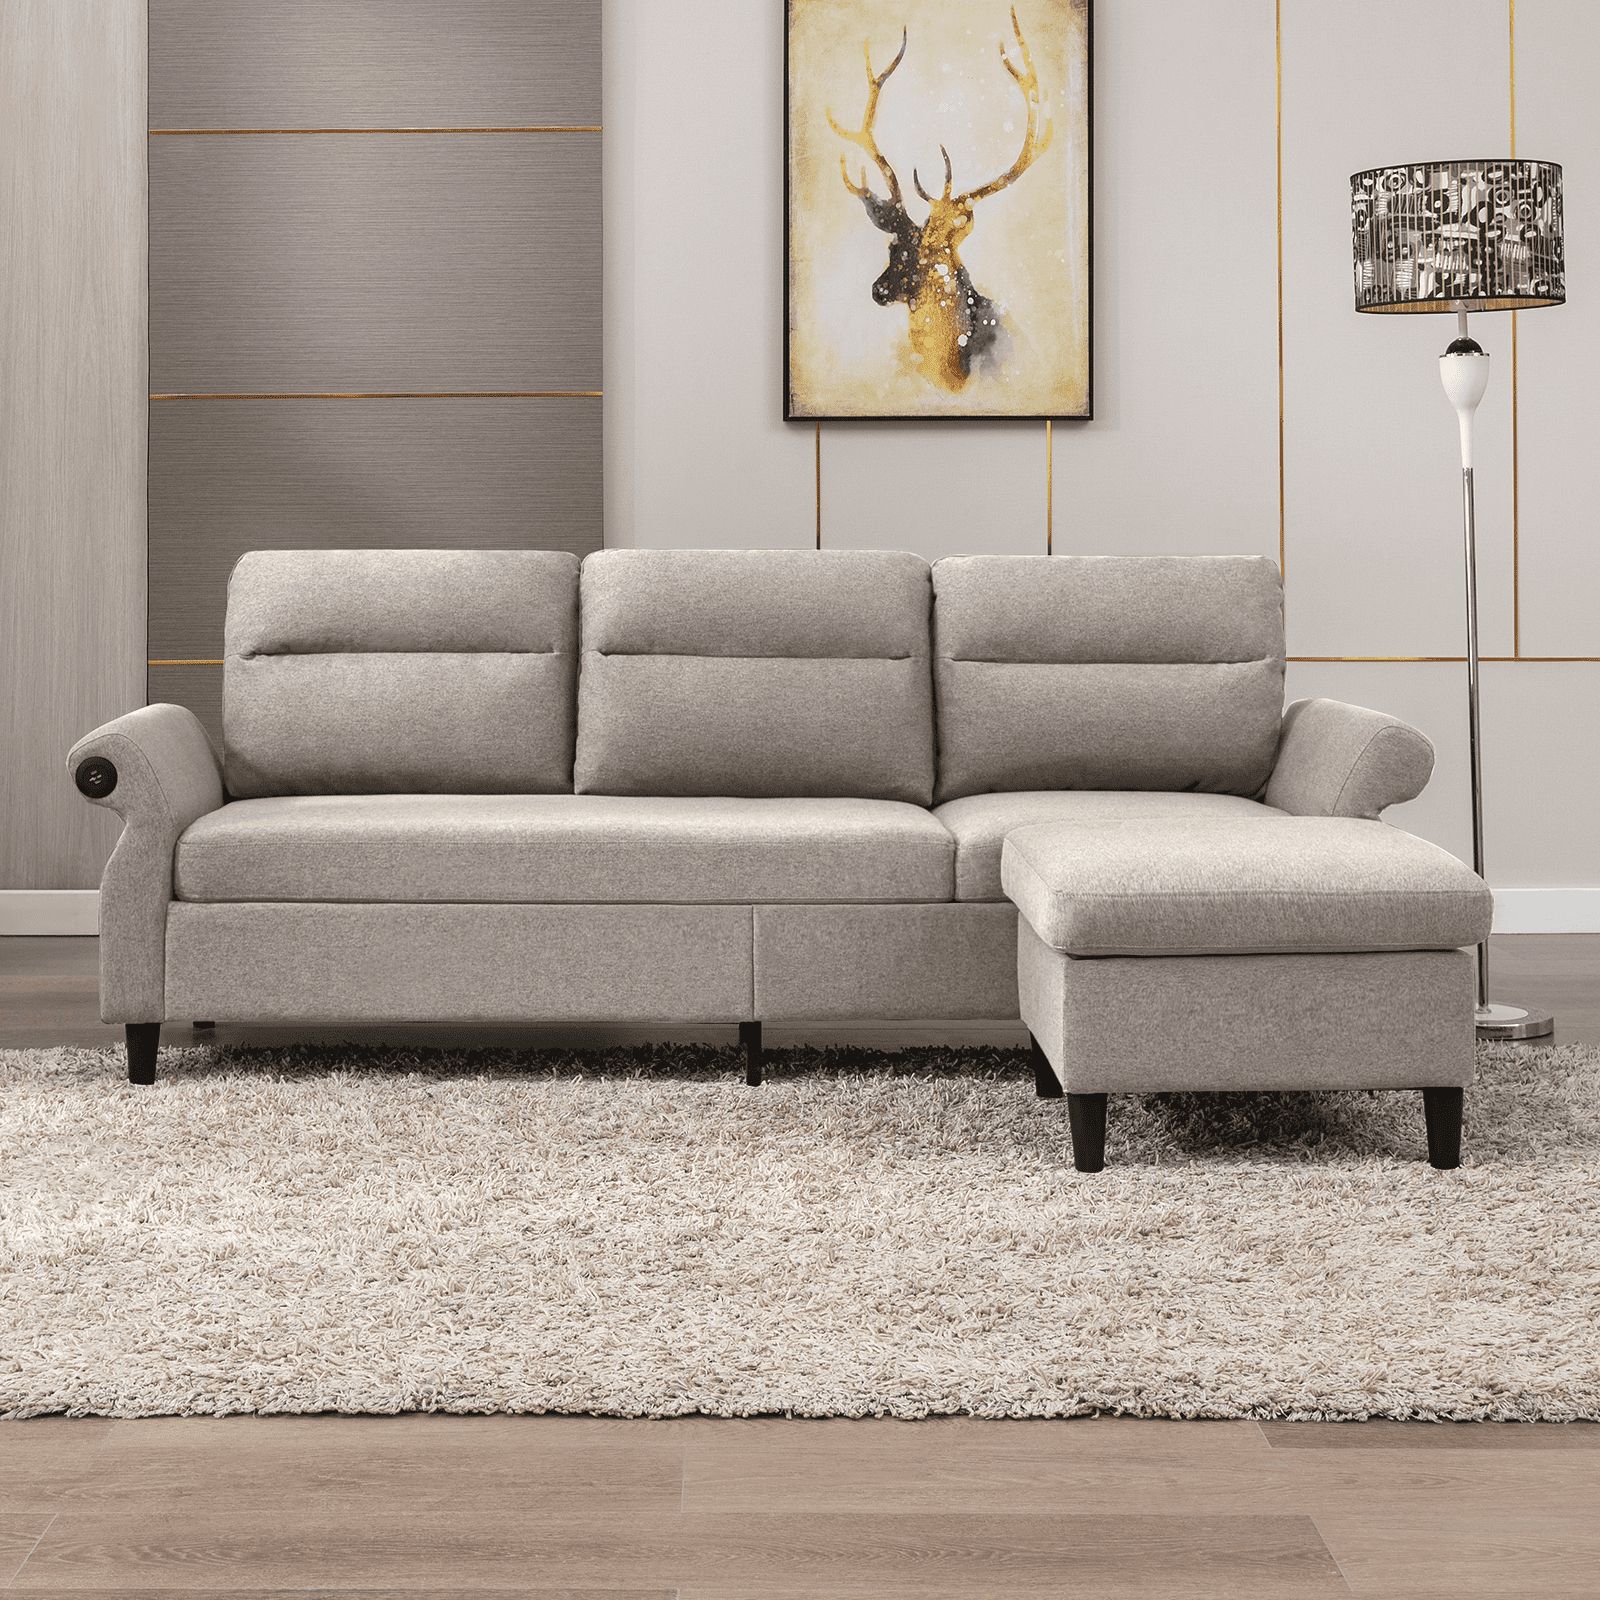 Mjkone Modern 88" W Convertible Sectional Sofa Couch With 2 Usb Ports And  Adjustable Armres,3 Seat L Shape Sofa Couch With,Ottoman For Living  Room,Apartment , Linen Fabric,Light Grey – Walmart Pertaining To 3 Seat L Shape Sofa Couches With 2 Usb Ports (View 2 of 15)